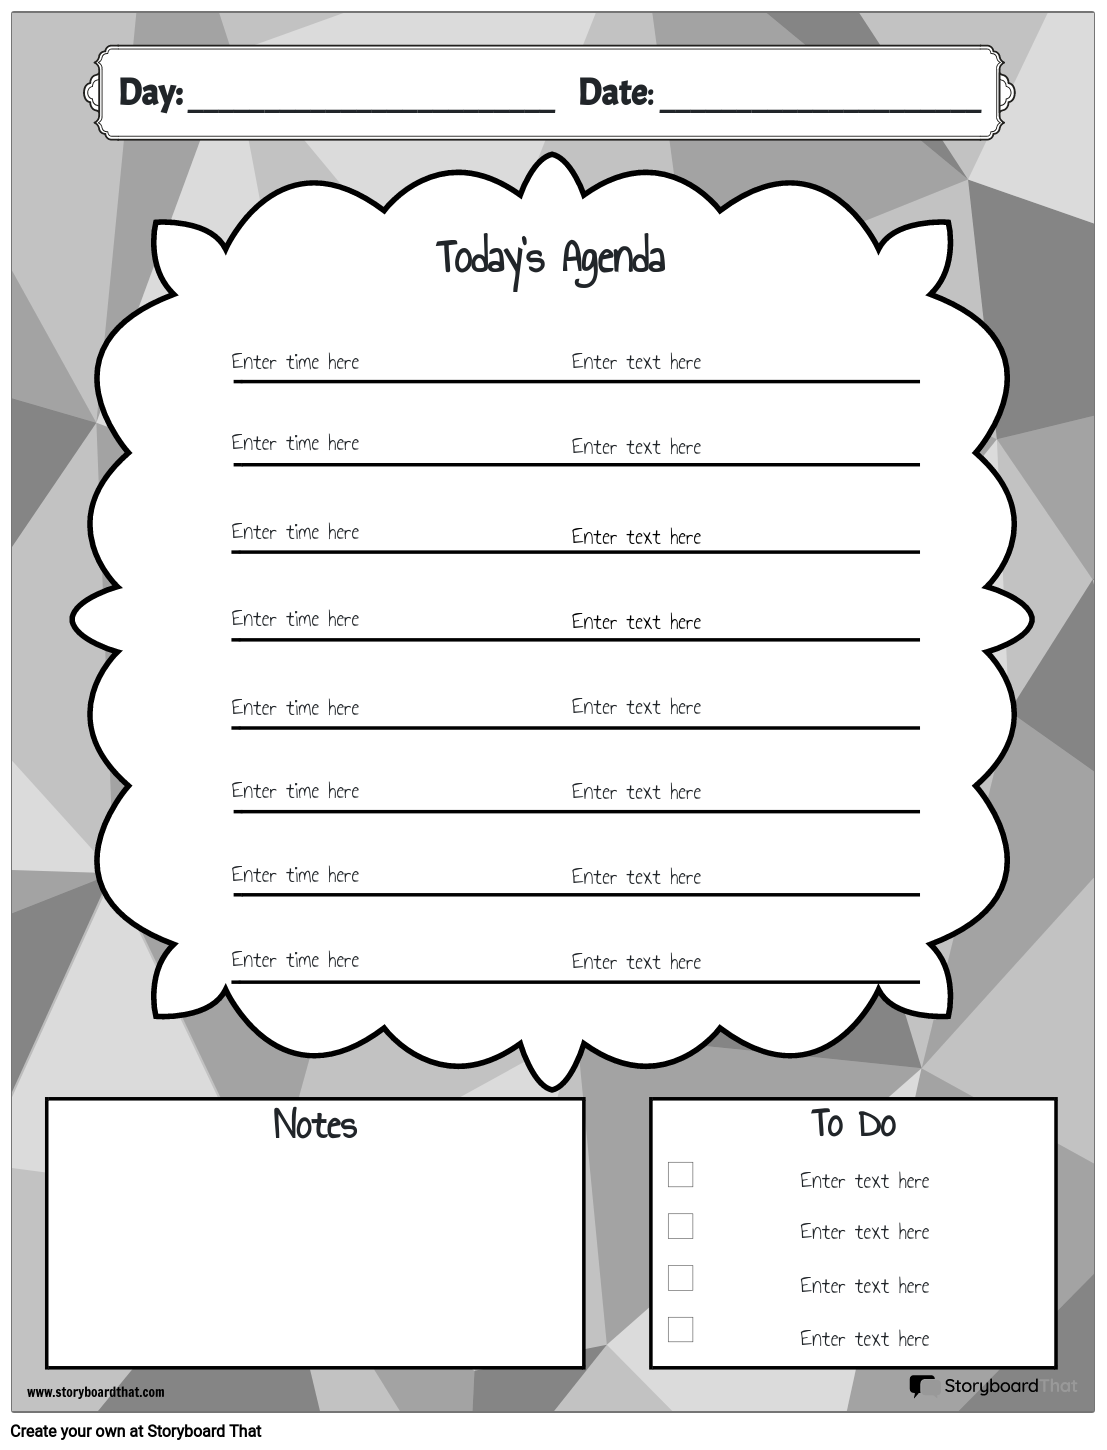 planner-worksheets-daily-schedule-maker-daily-planner-templates